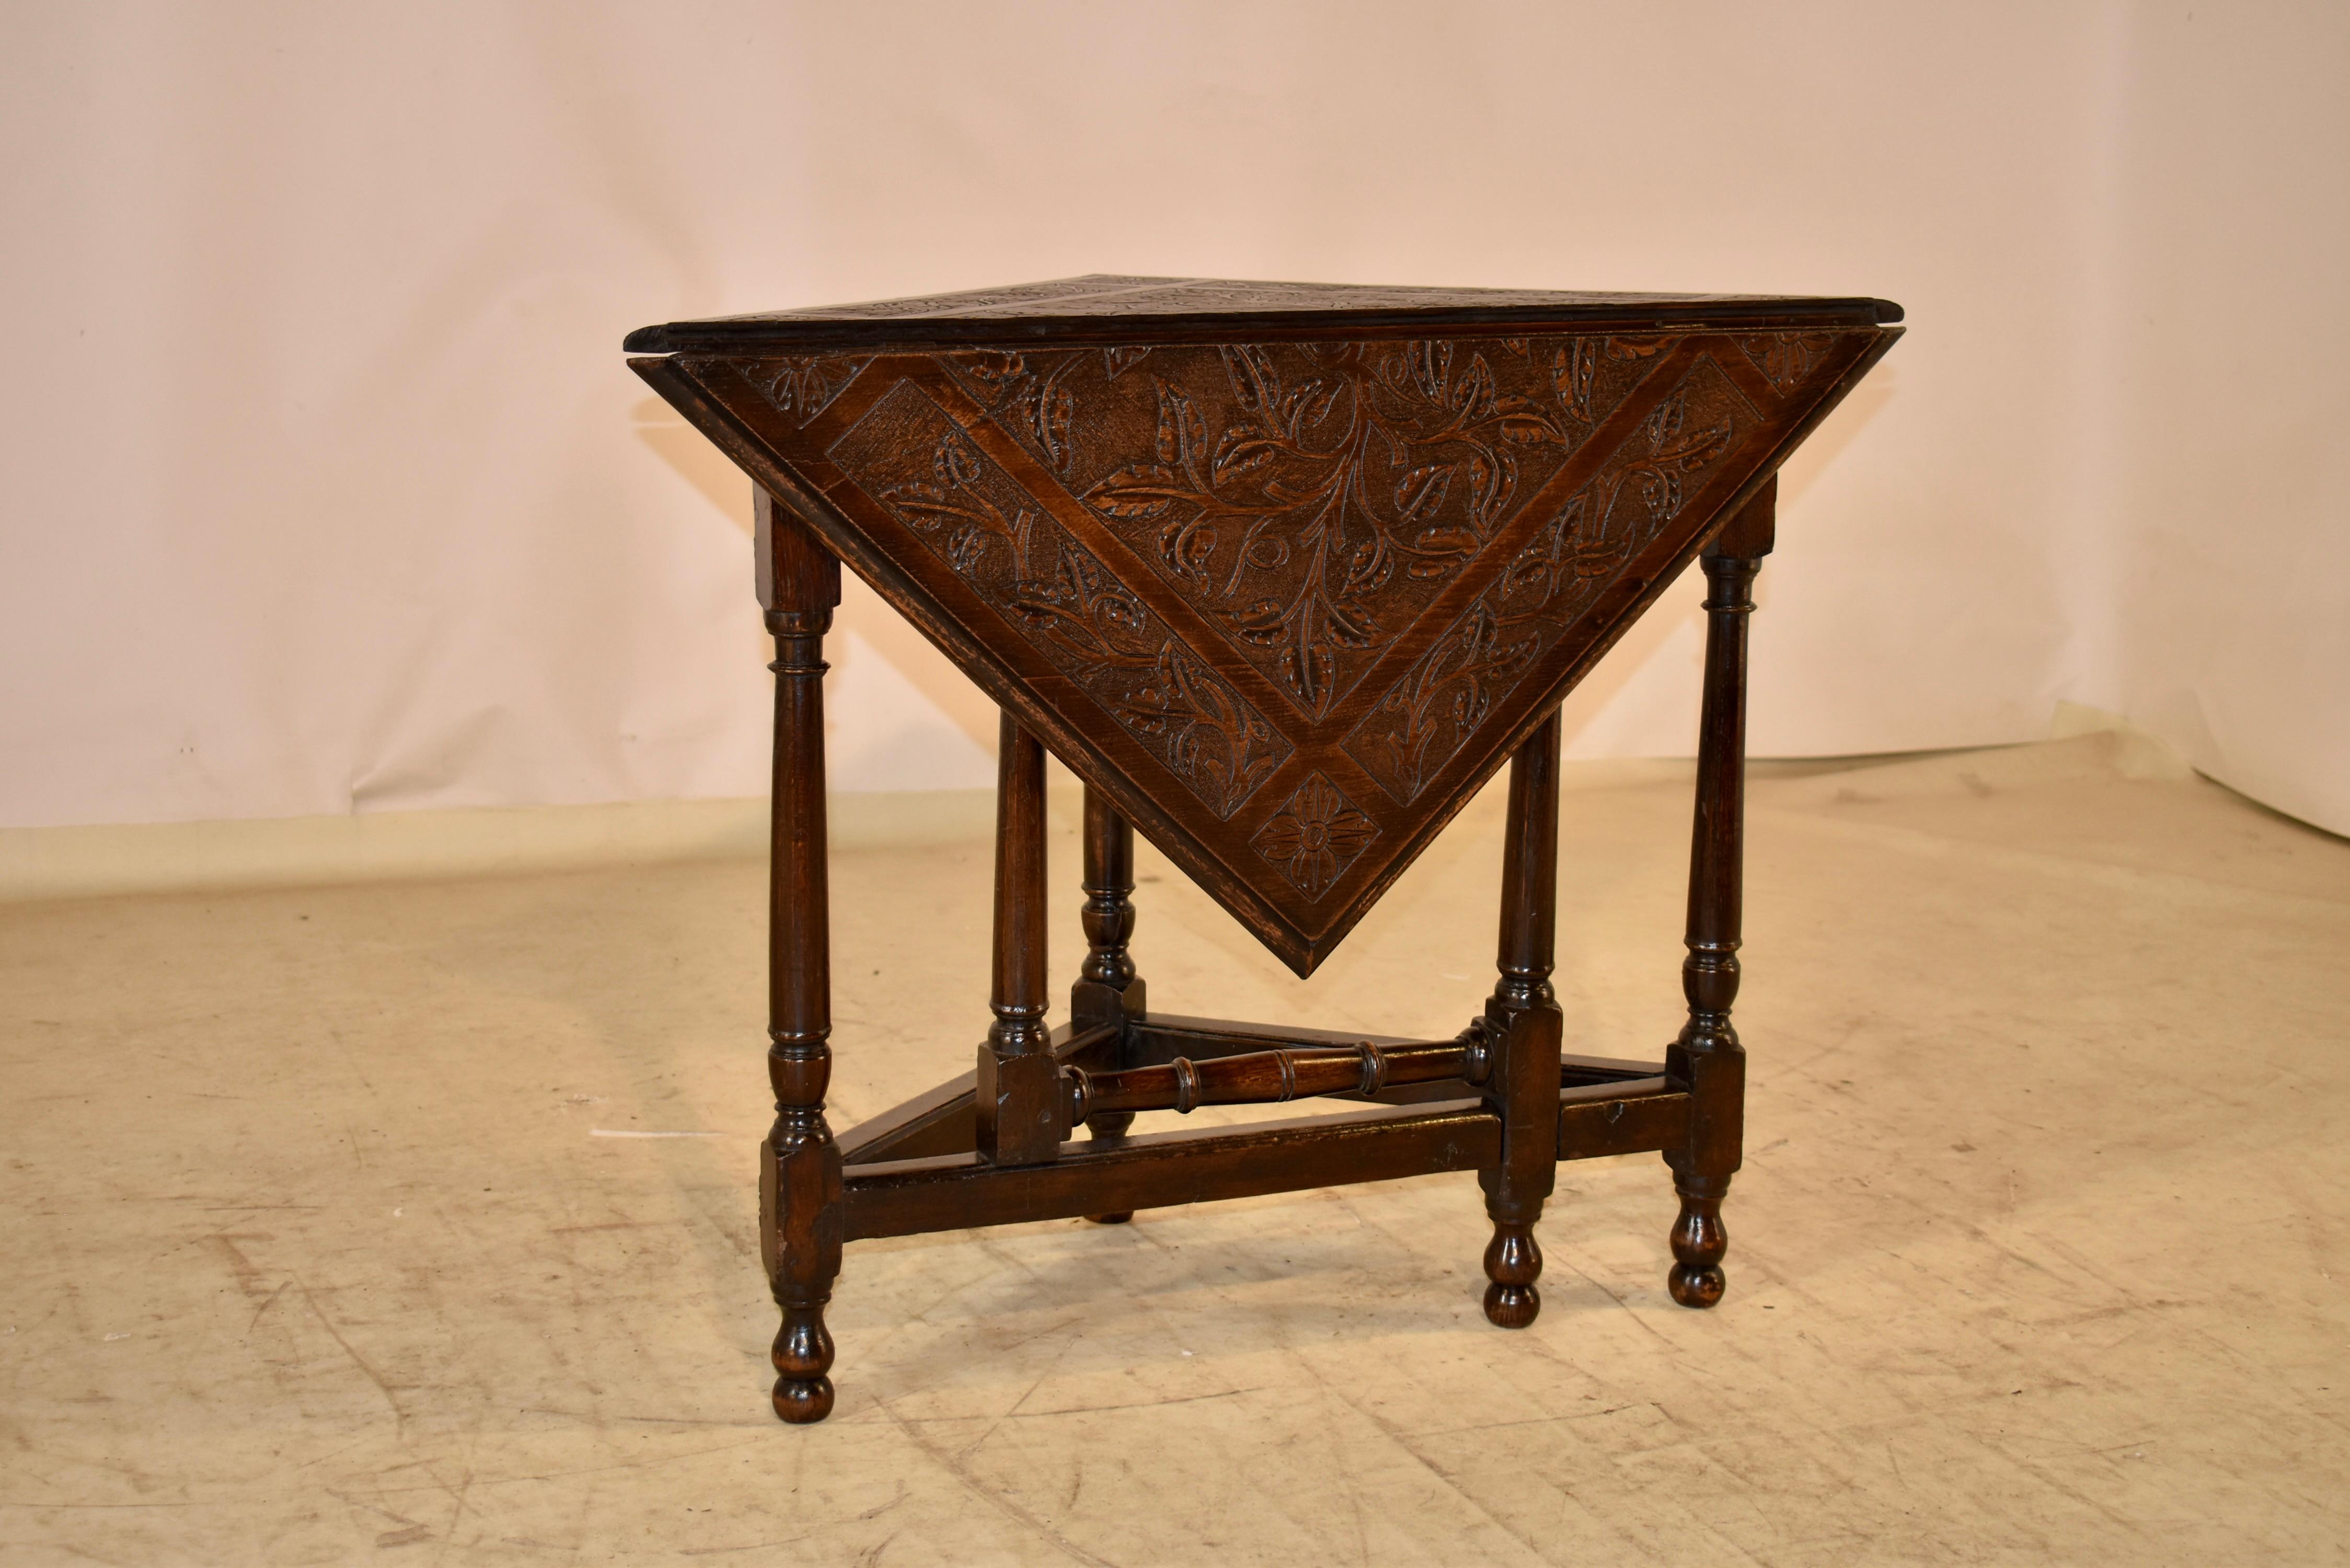 Hand-Carved 18th Century English Oak Carved Handkerchief Table For Sale